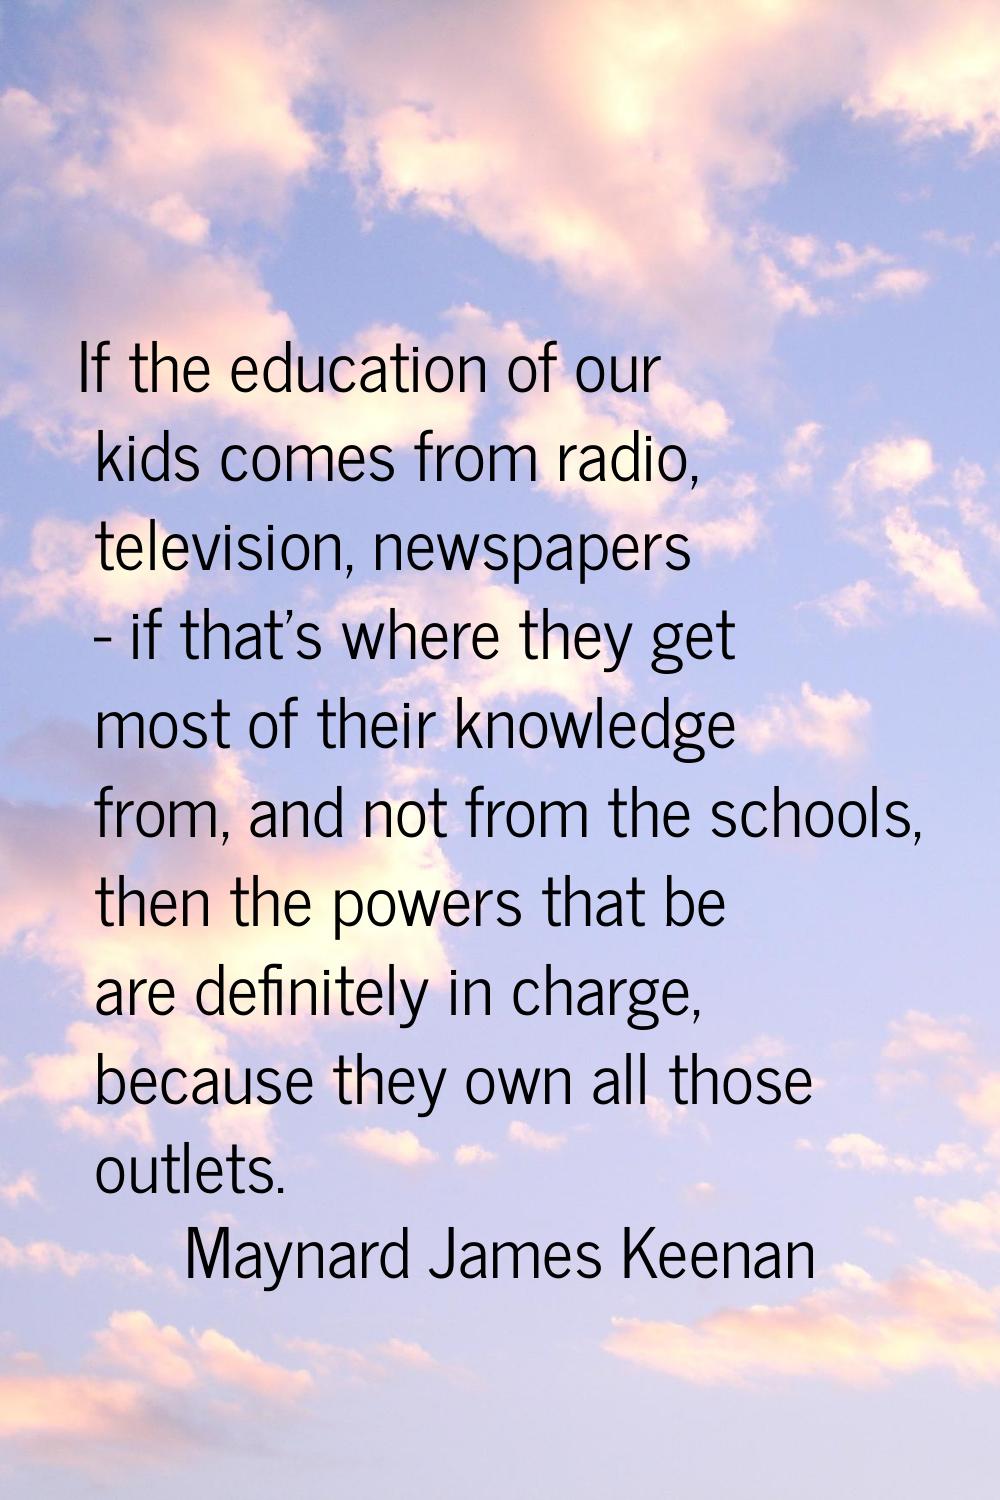 If the education of our kids comes from radio, television, newspapers - if that's where they get mo